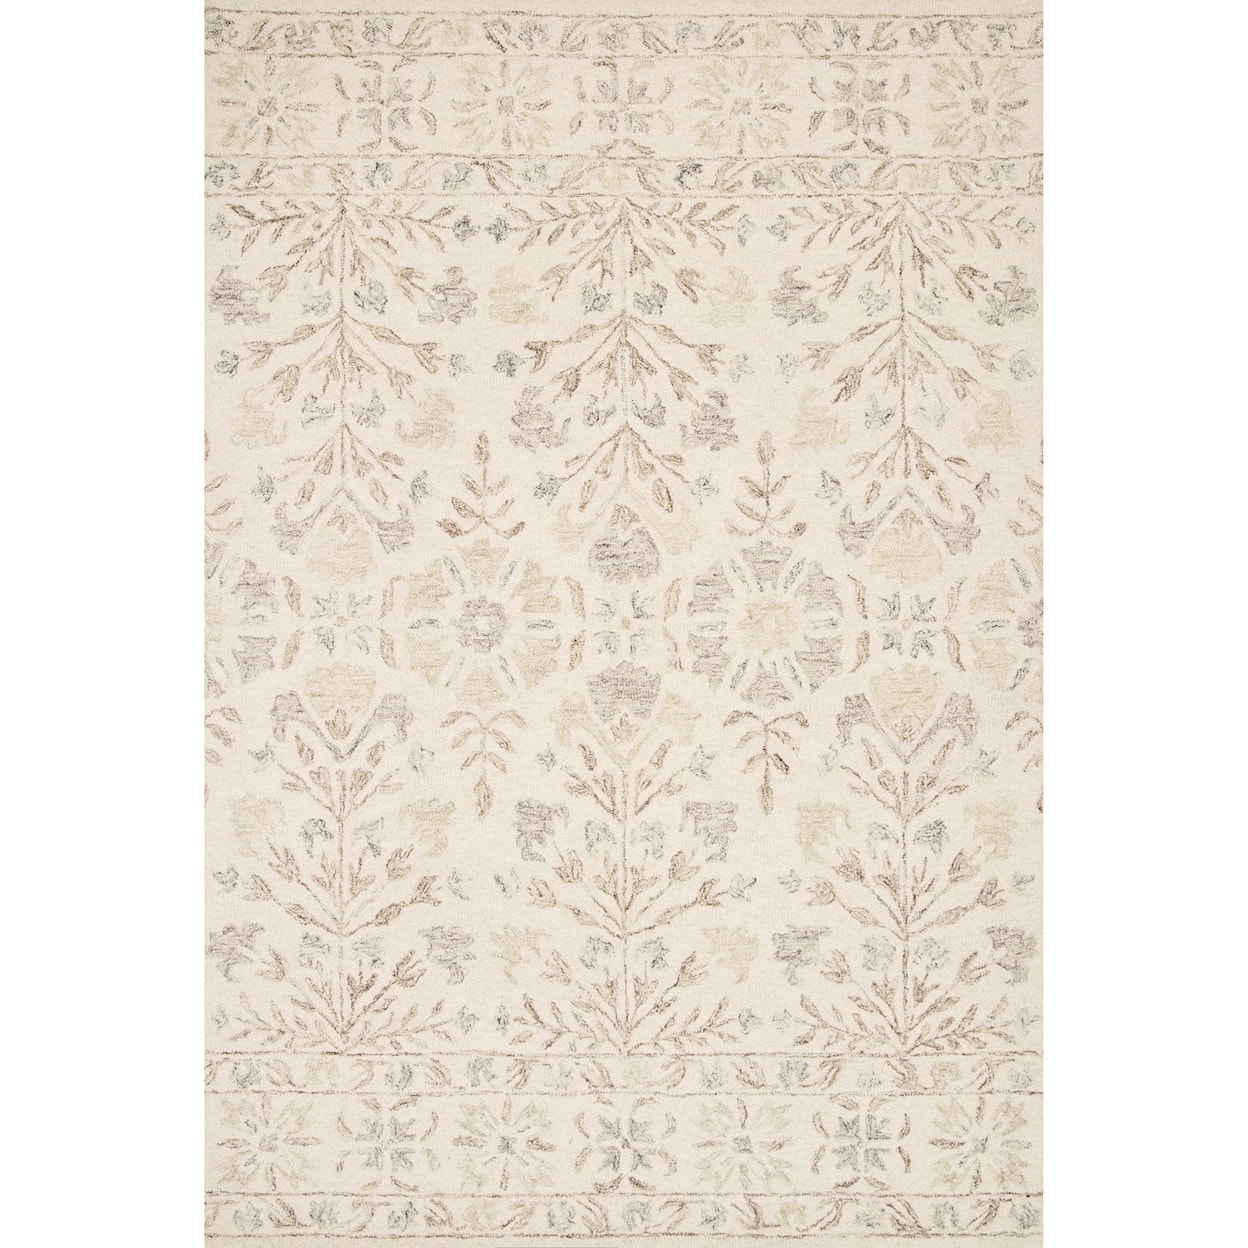 Loloi Rugs Norabel 2'3" x 3'9" Ivory / Neutral Rug